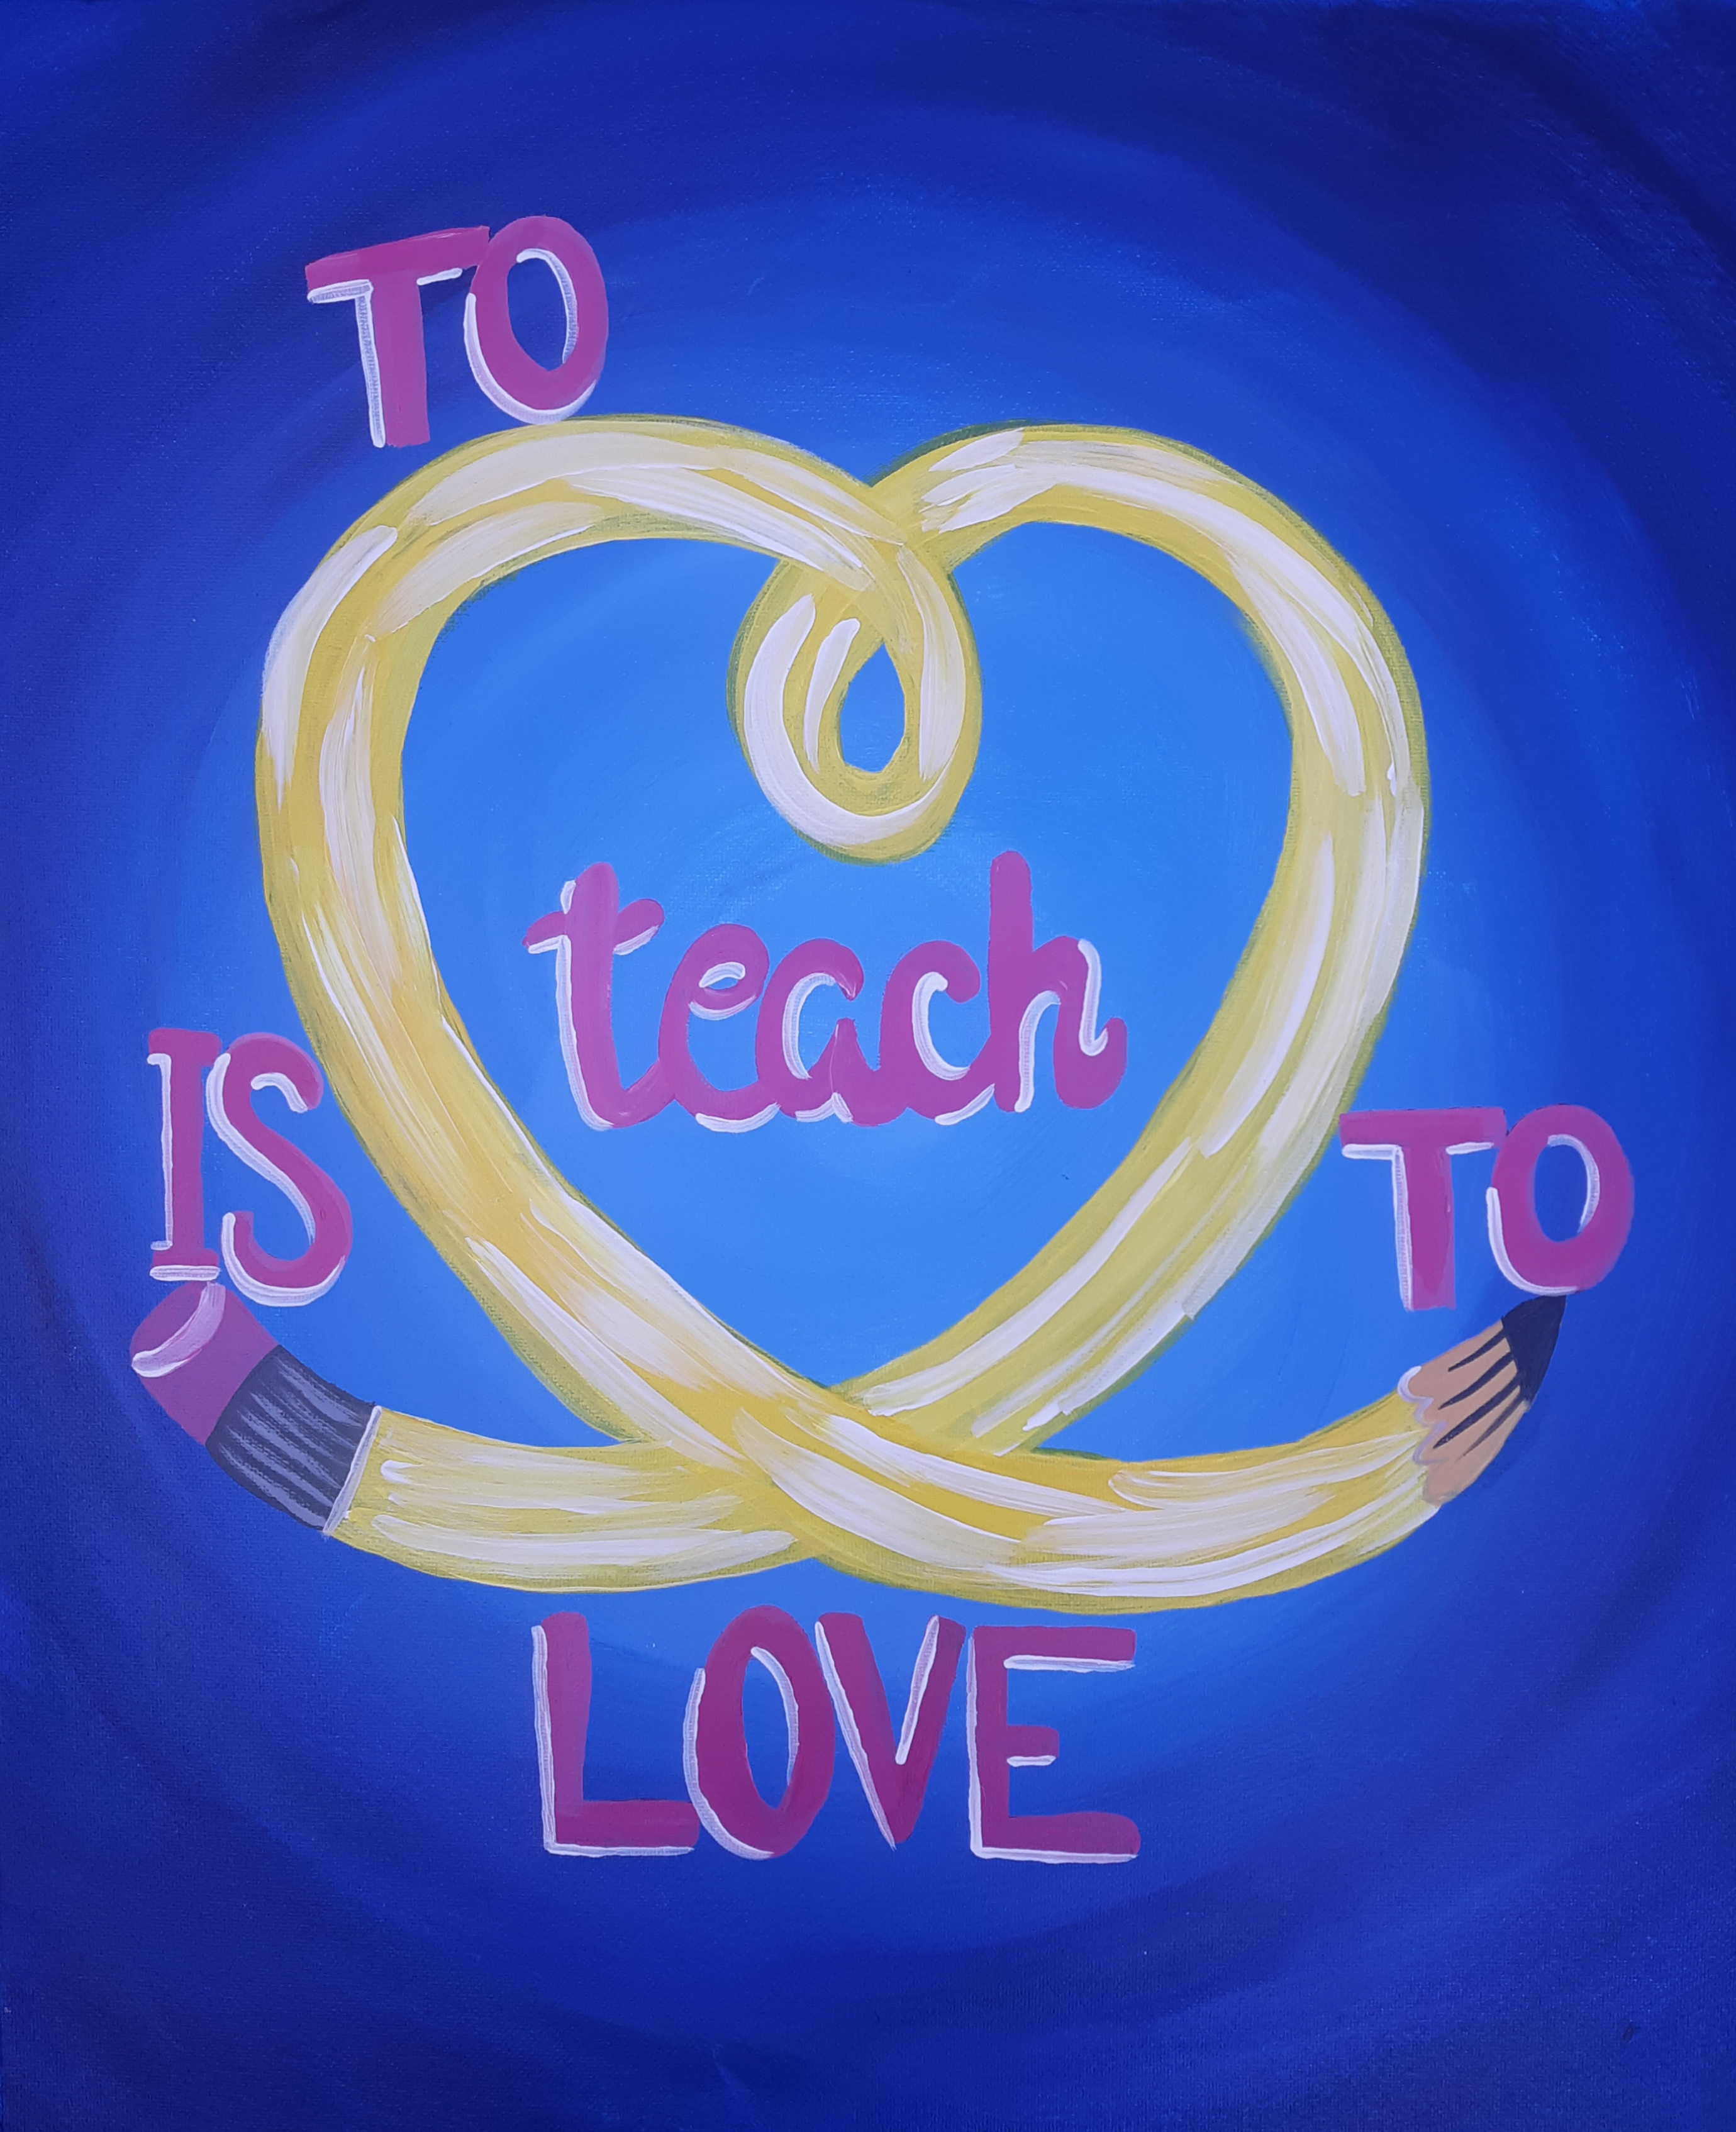 A Teacher Love experience project by Yaymaker